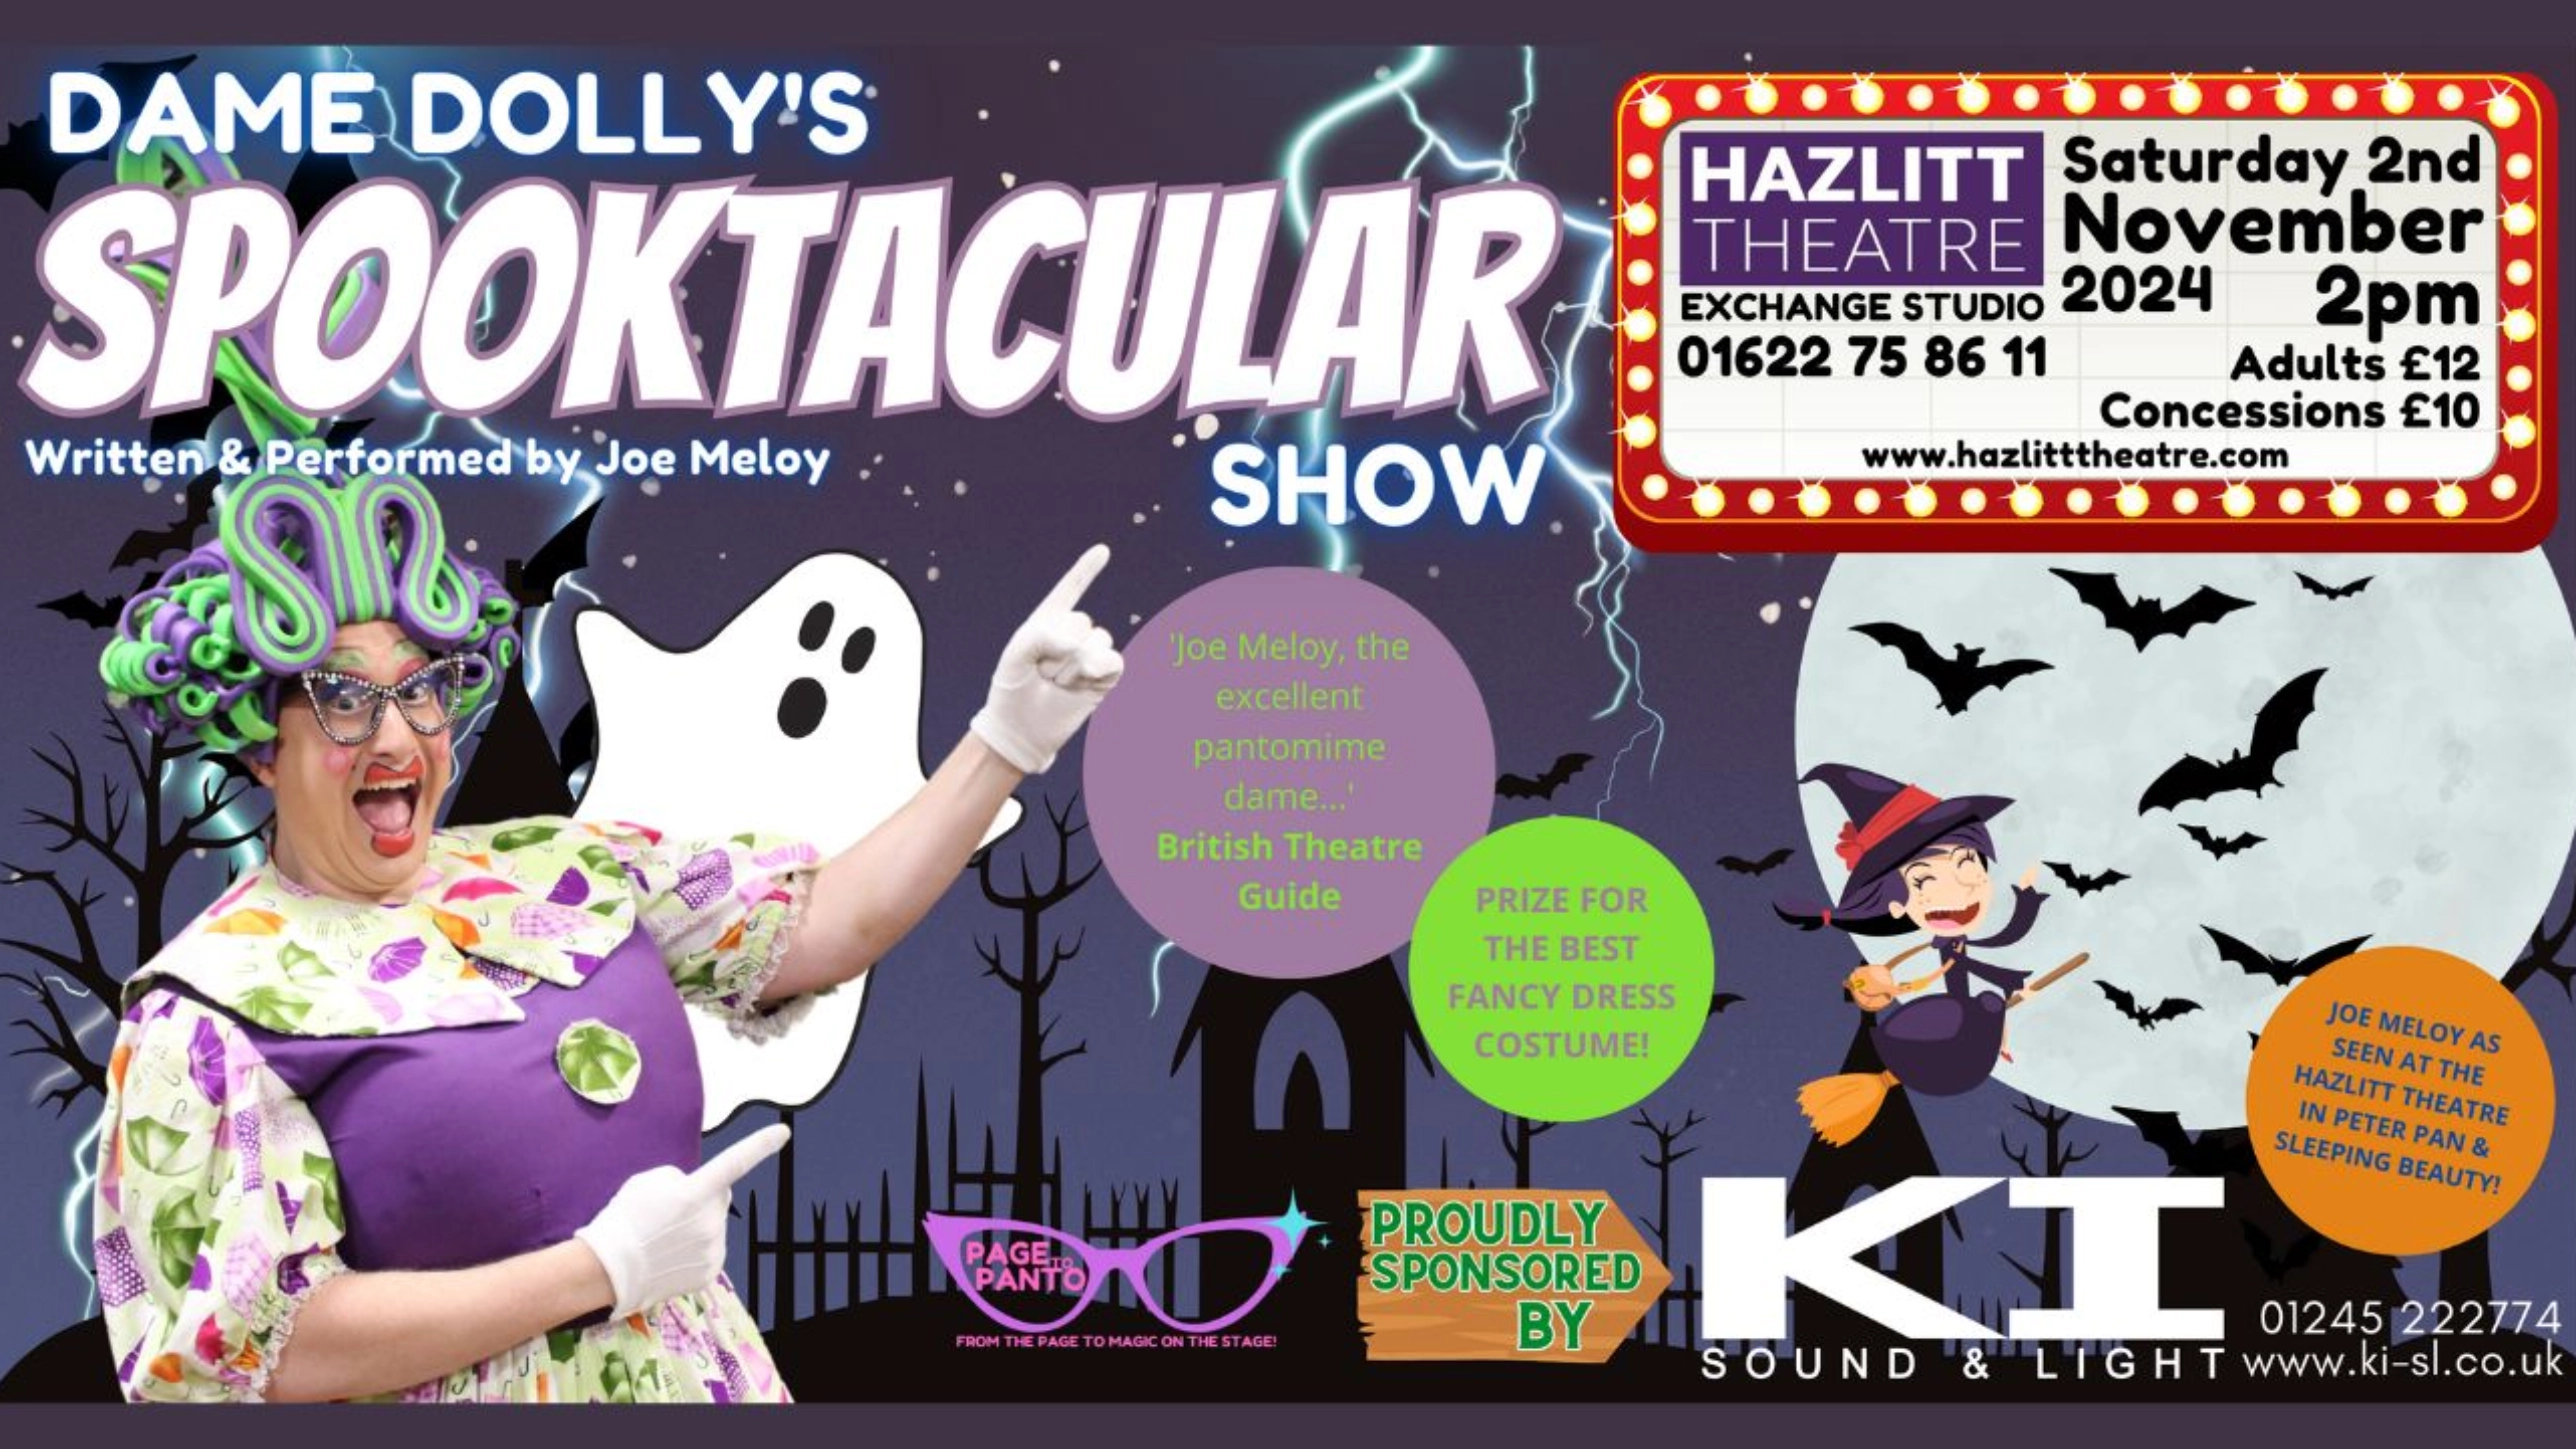 Dame Dolly's Spooktacular Show 